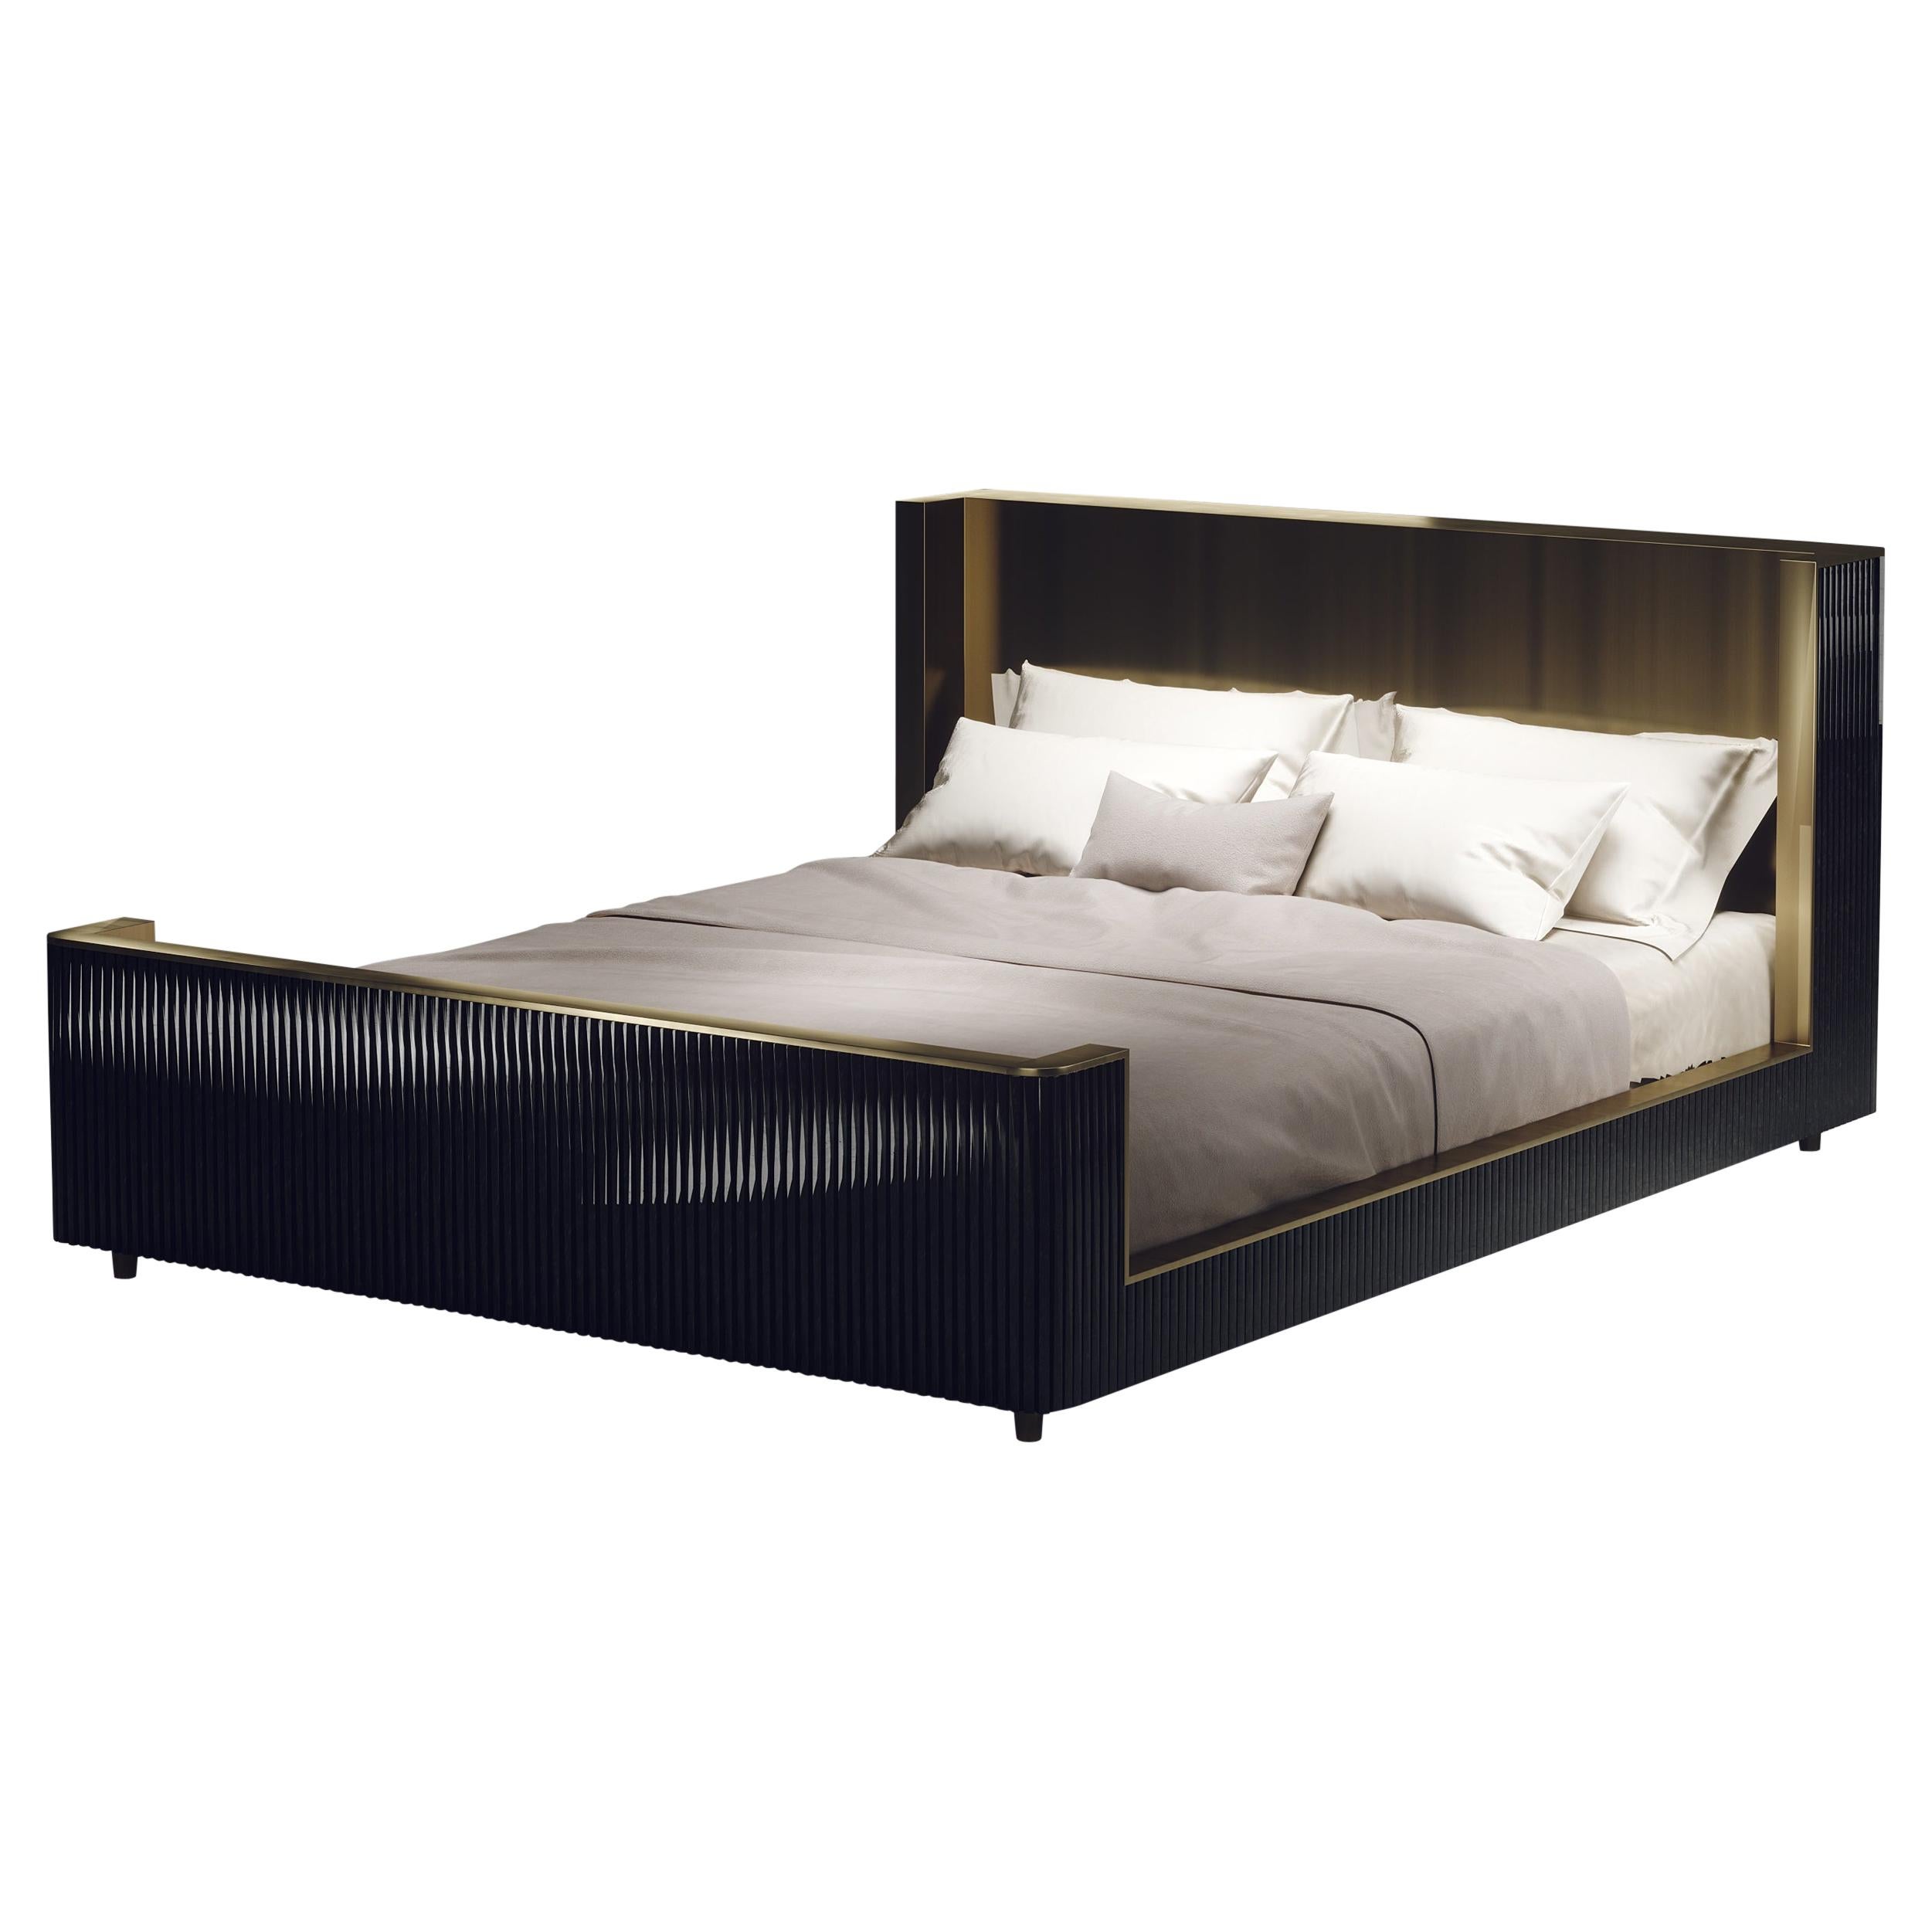 Shell and Brass Bed Frame with Geometric Fluted Details - 50% dep for Mike